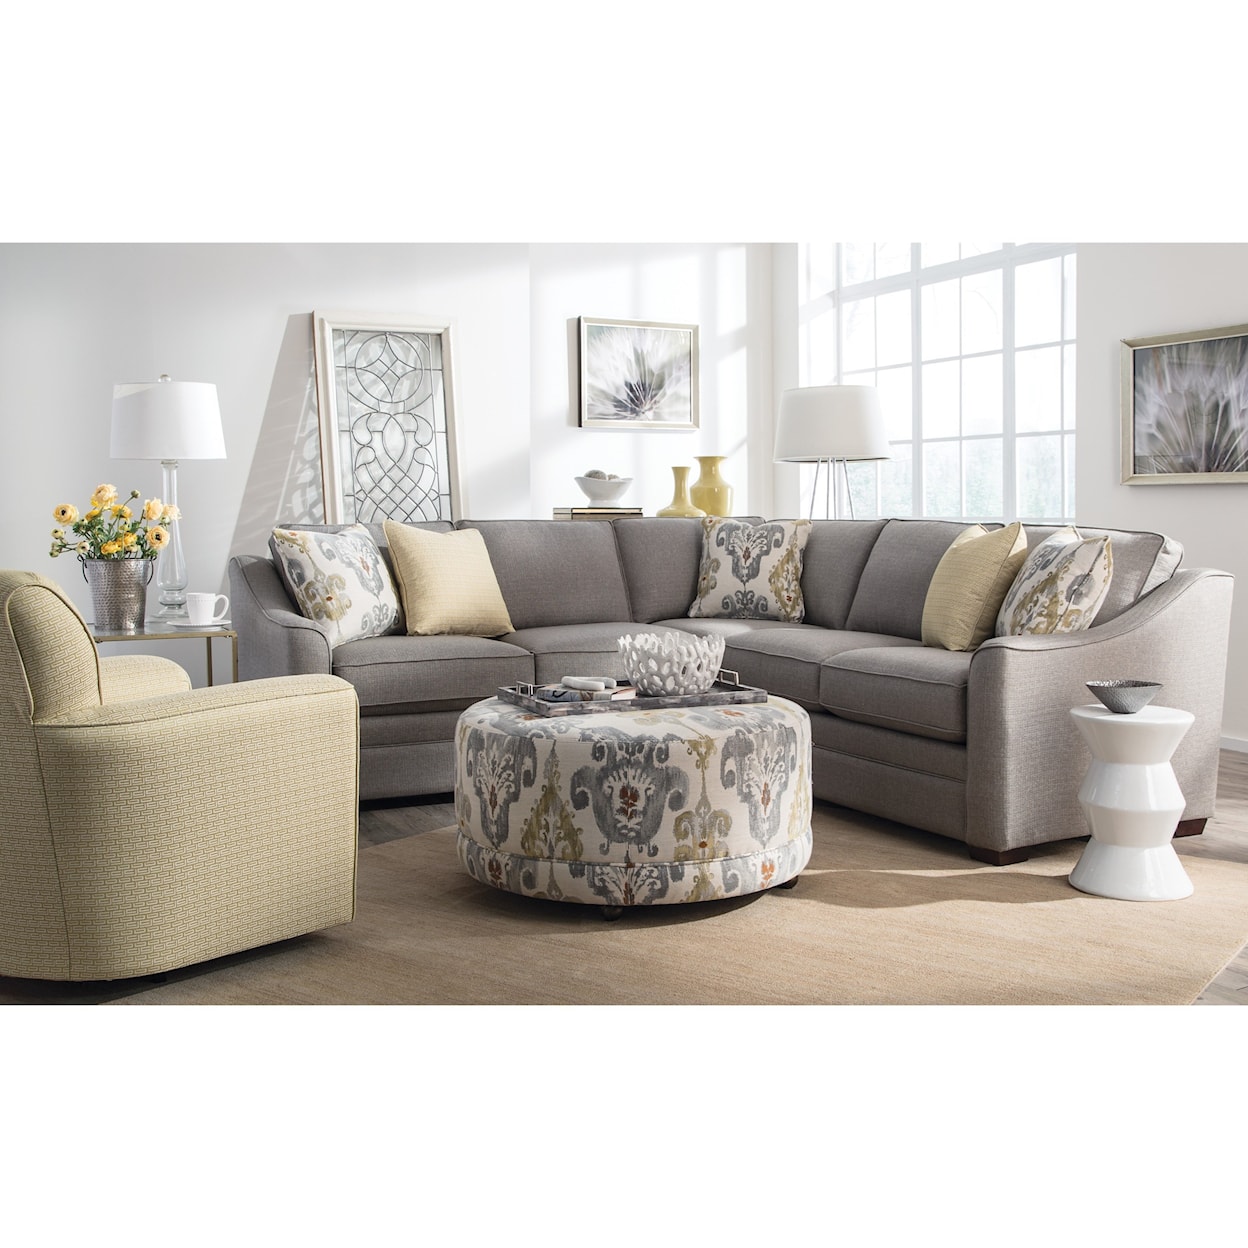 Craftmaster F9 Custom Collection Living Room Group